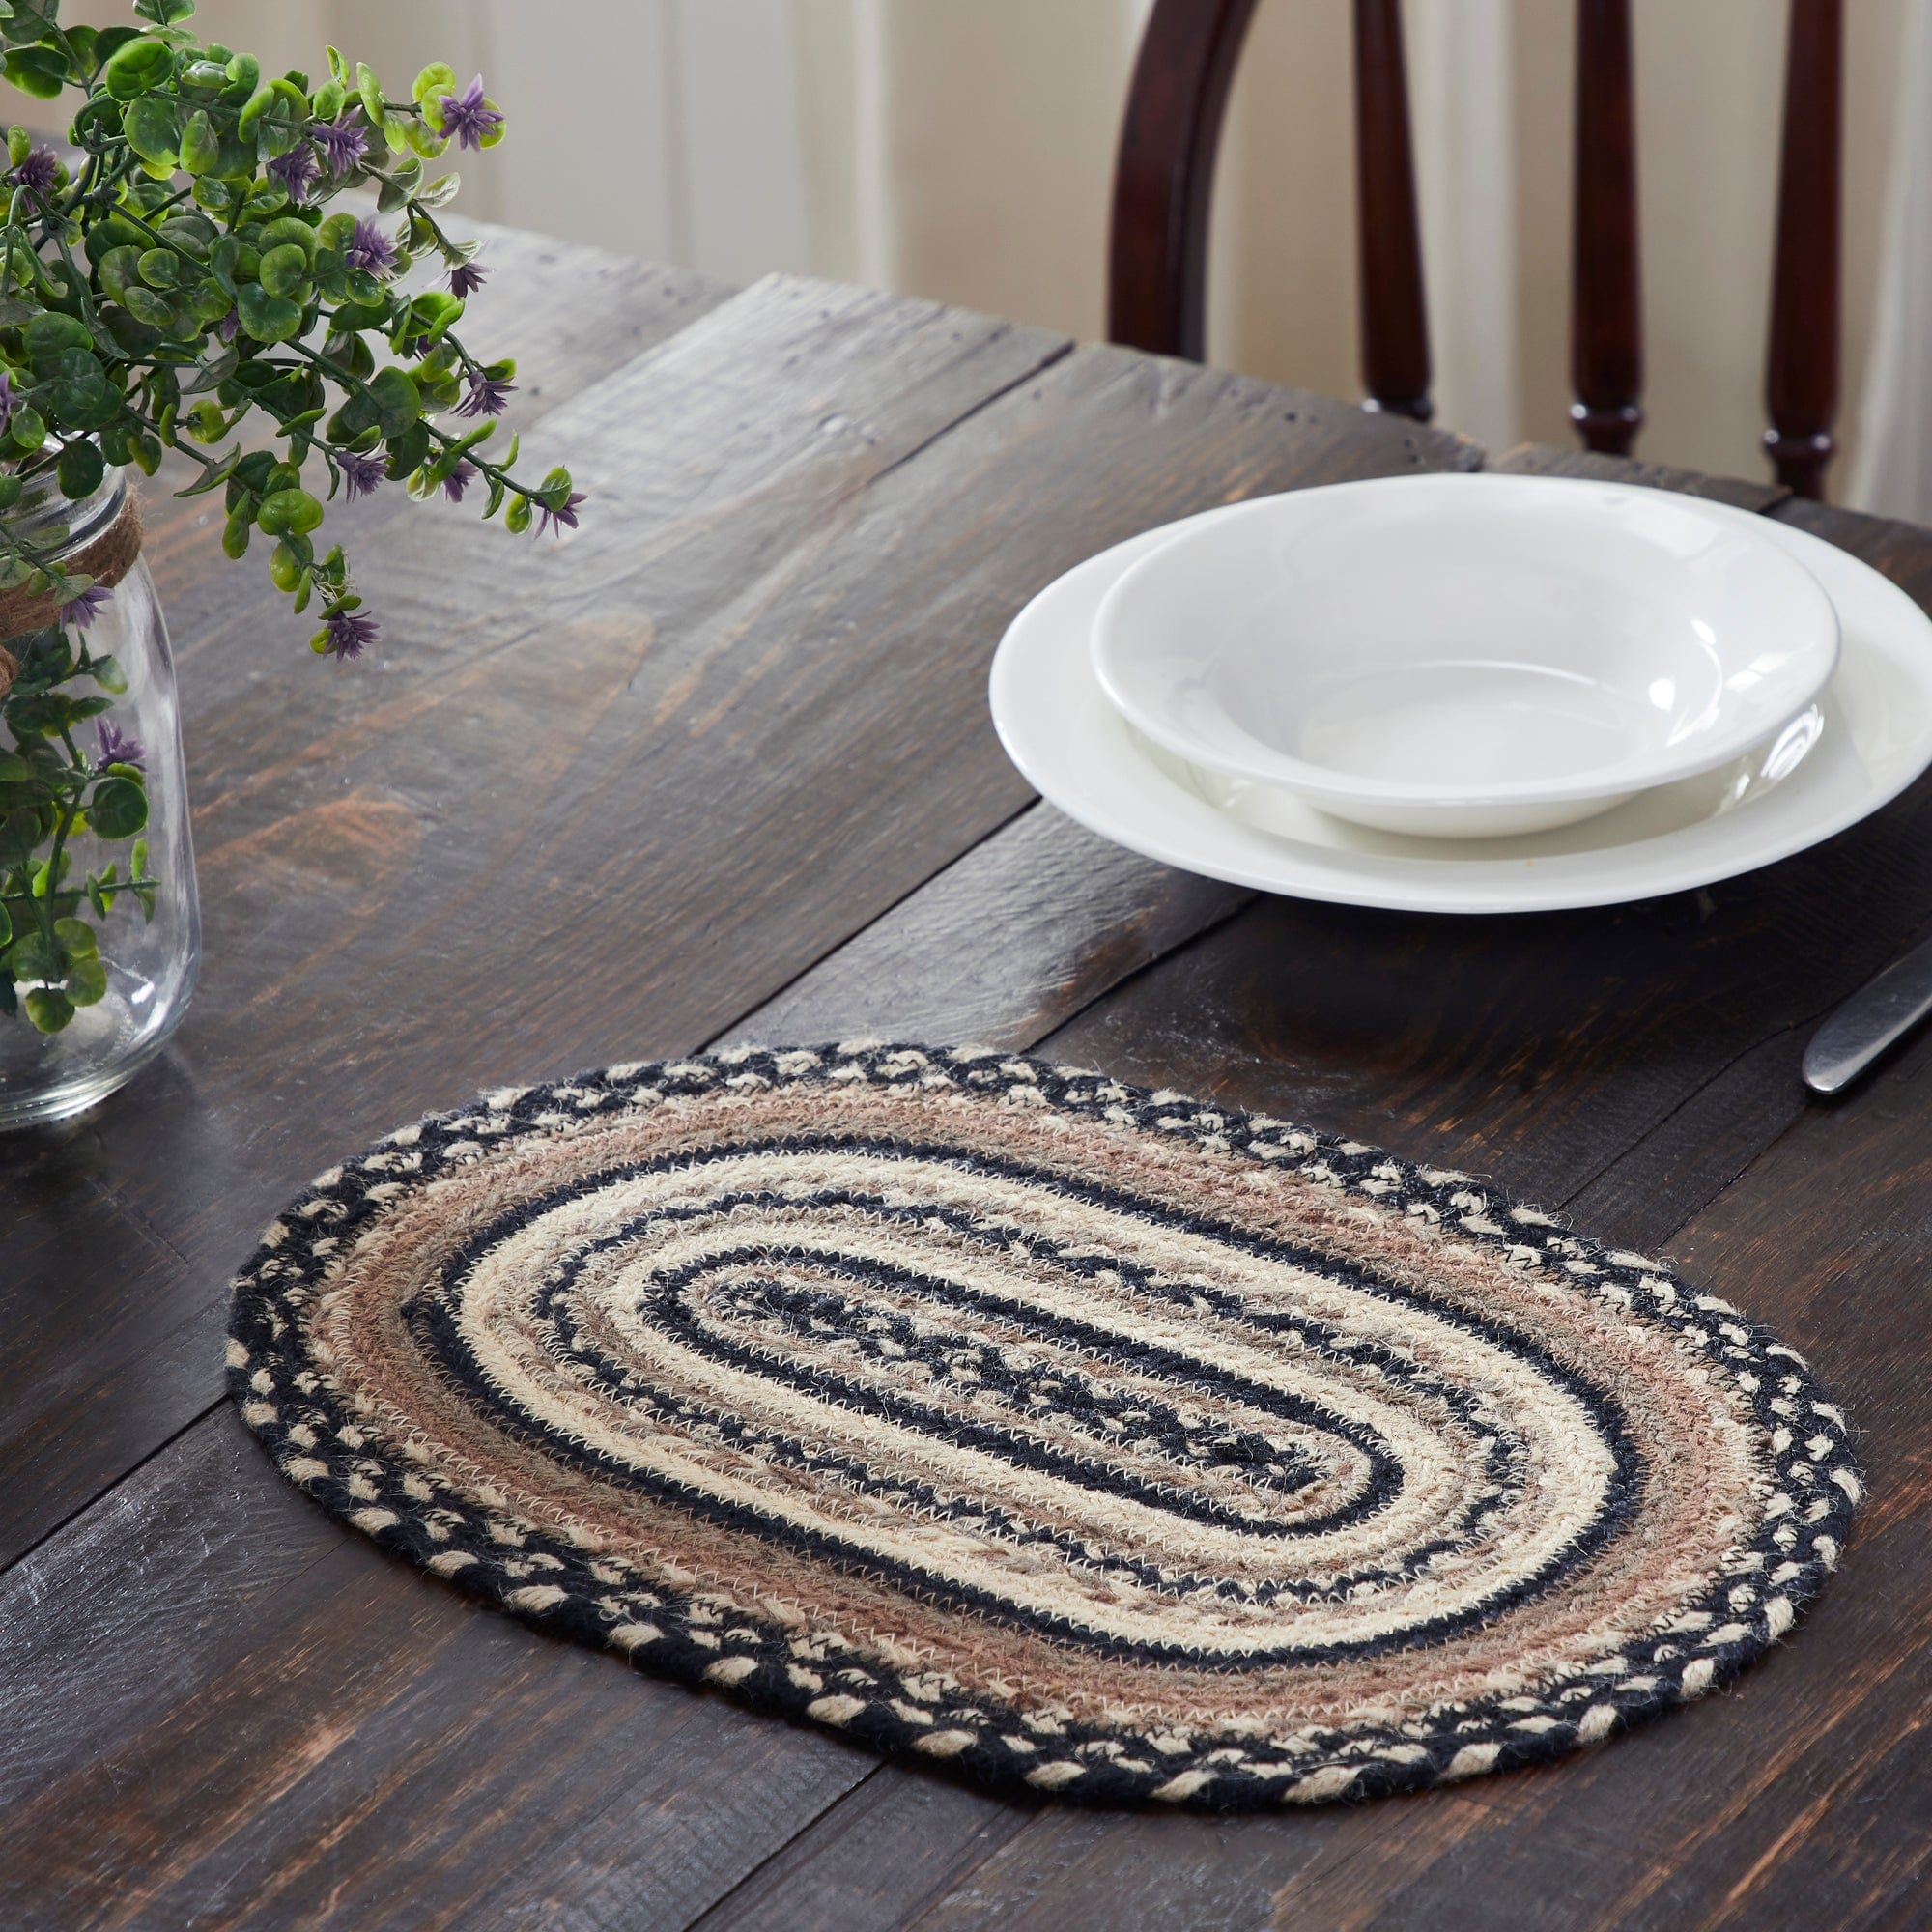 https://cdn.shopify.com/s/files/1/1069/0756/products/april-olive-placemat-sawyer-mill-charcoal-creme-jute-oval-placemat-10x15-31228821373102.jpg?v=1698785999